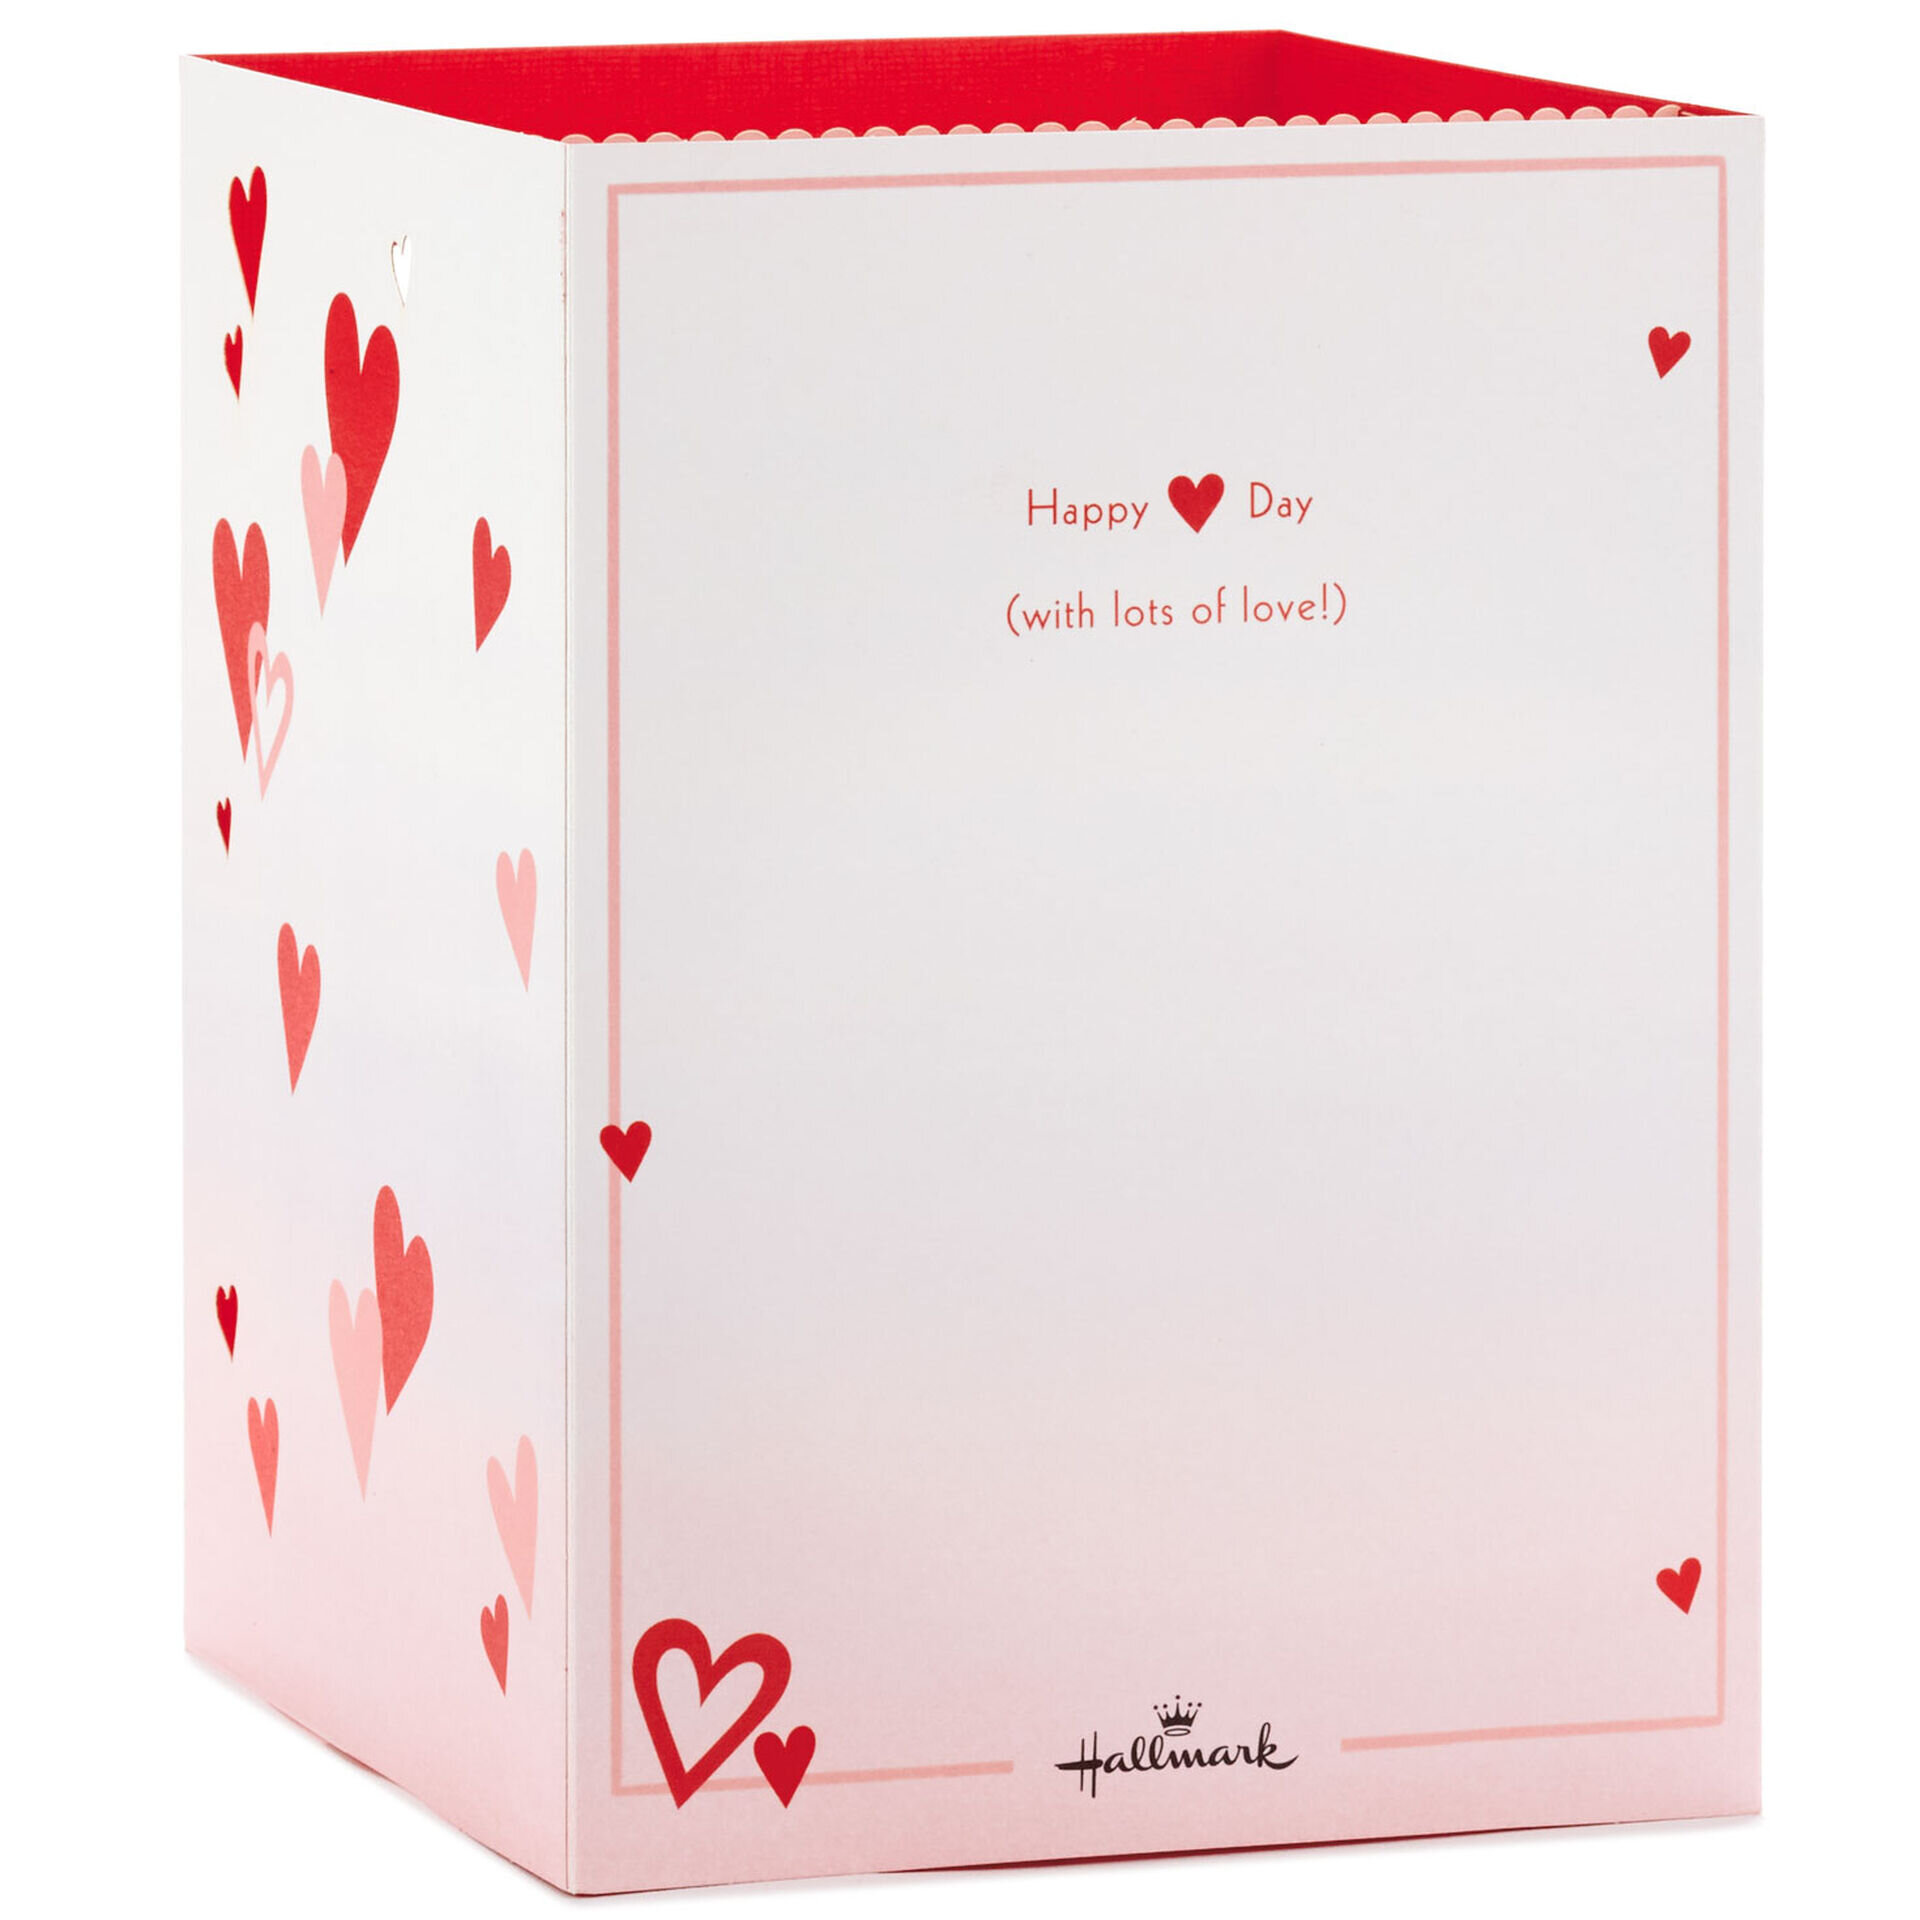 Love-You-More-Hearts-Box-3D-PopUp-Valentines-Day-Card_899VWF1141_02.jpg